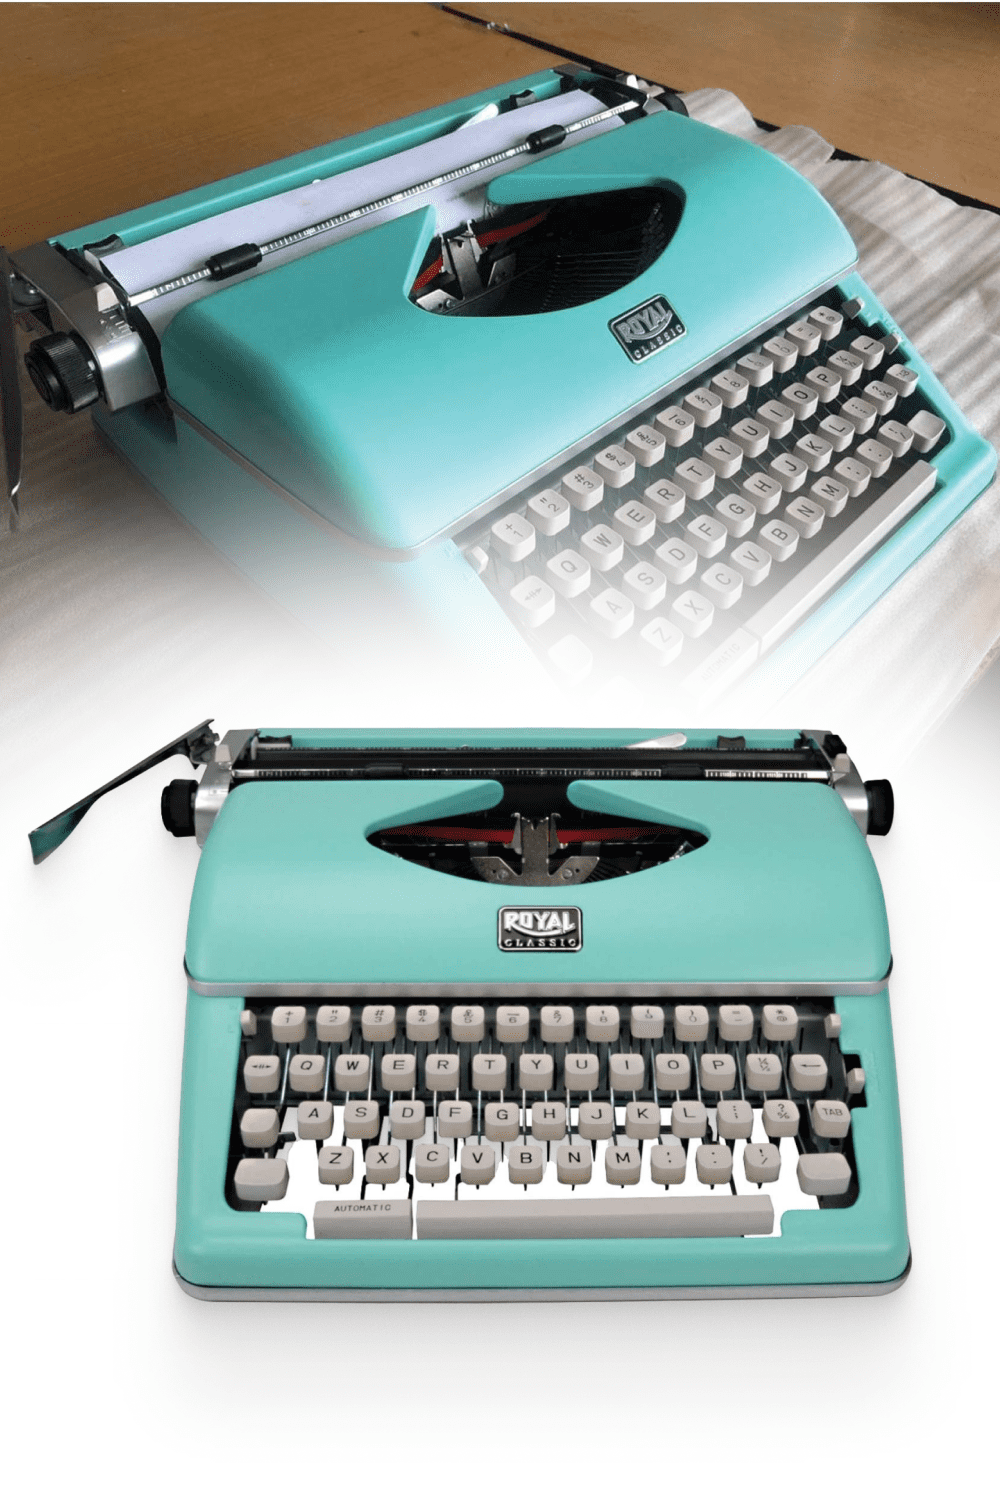 Photo of the Royal 79101T Classic Manual Typewriter.